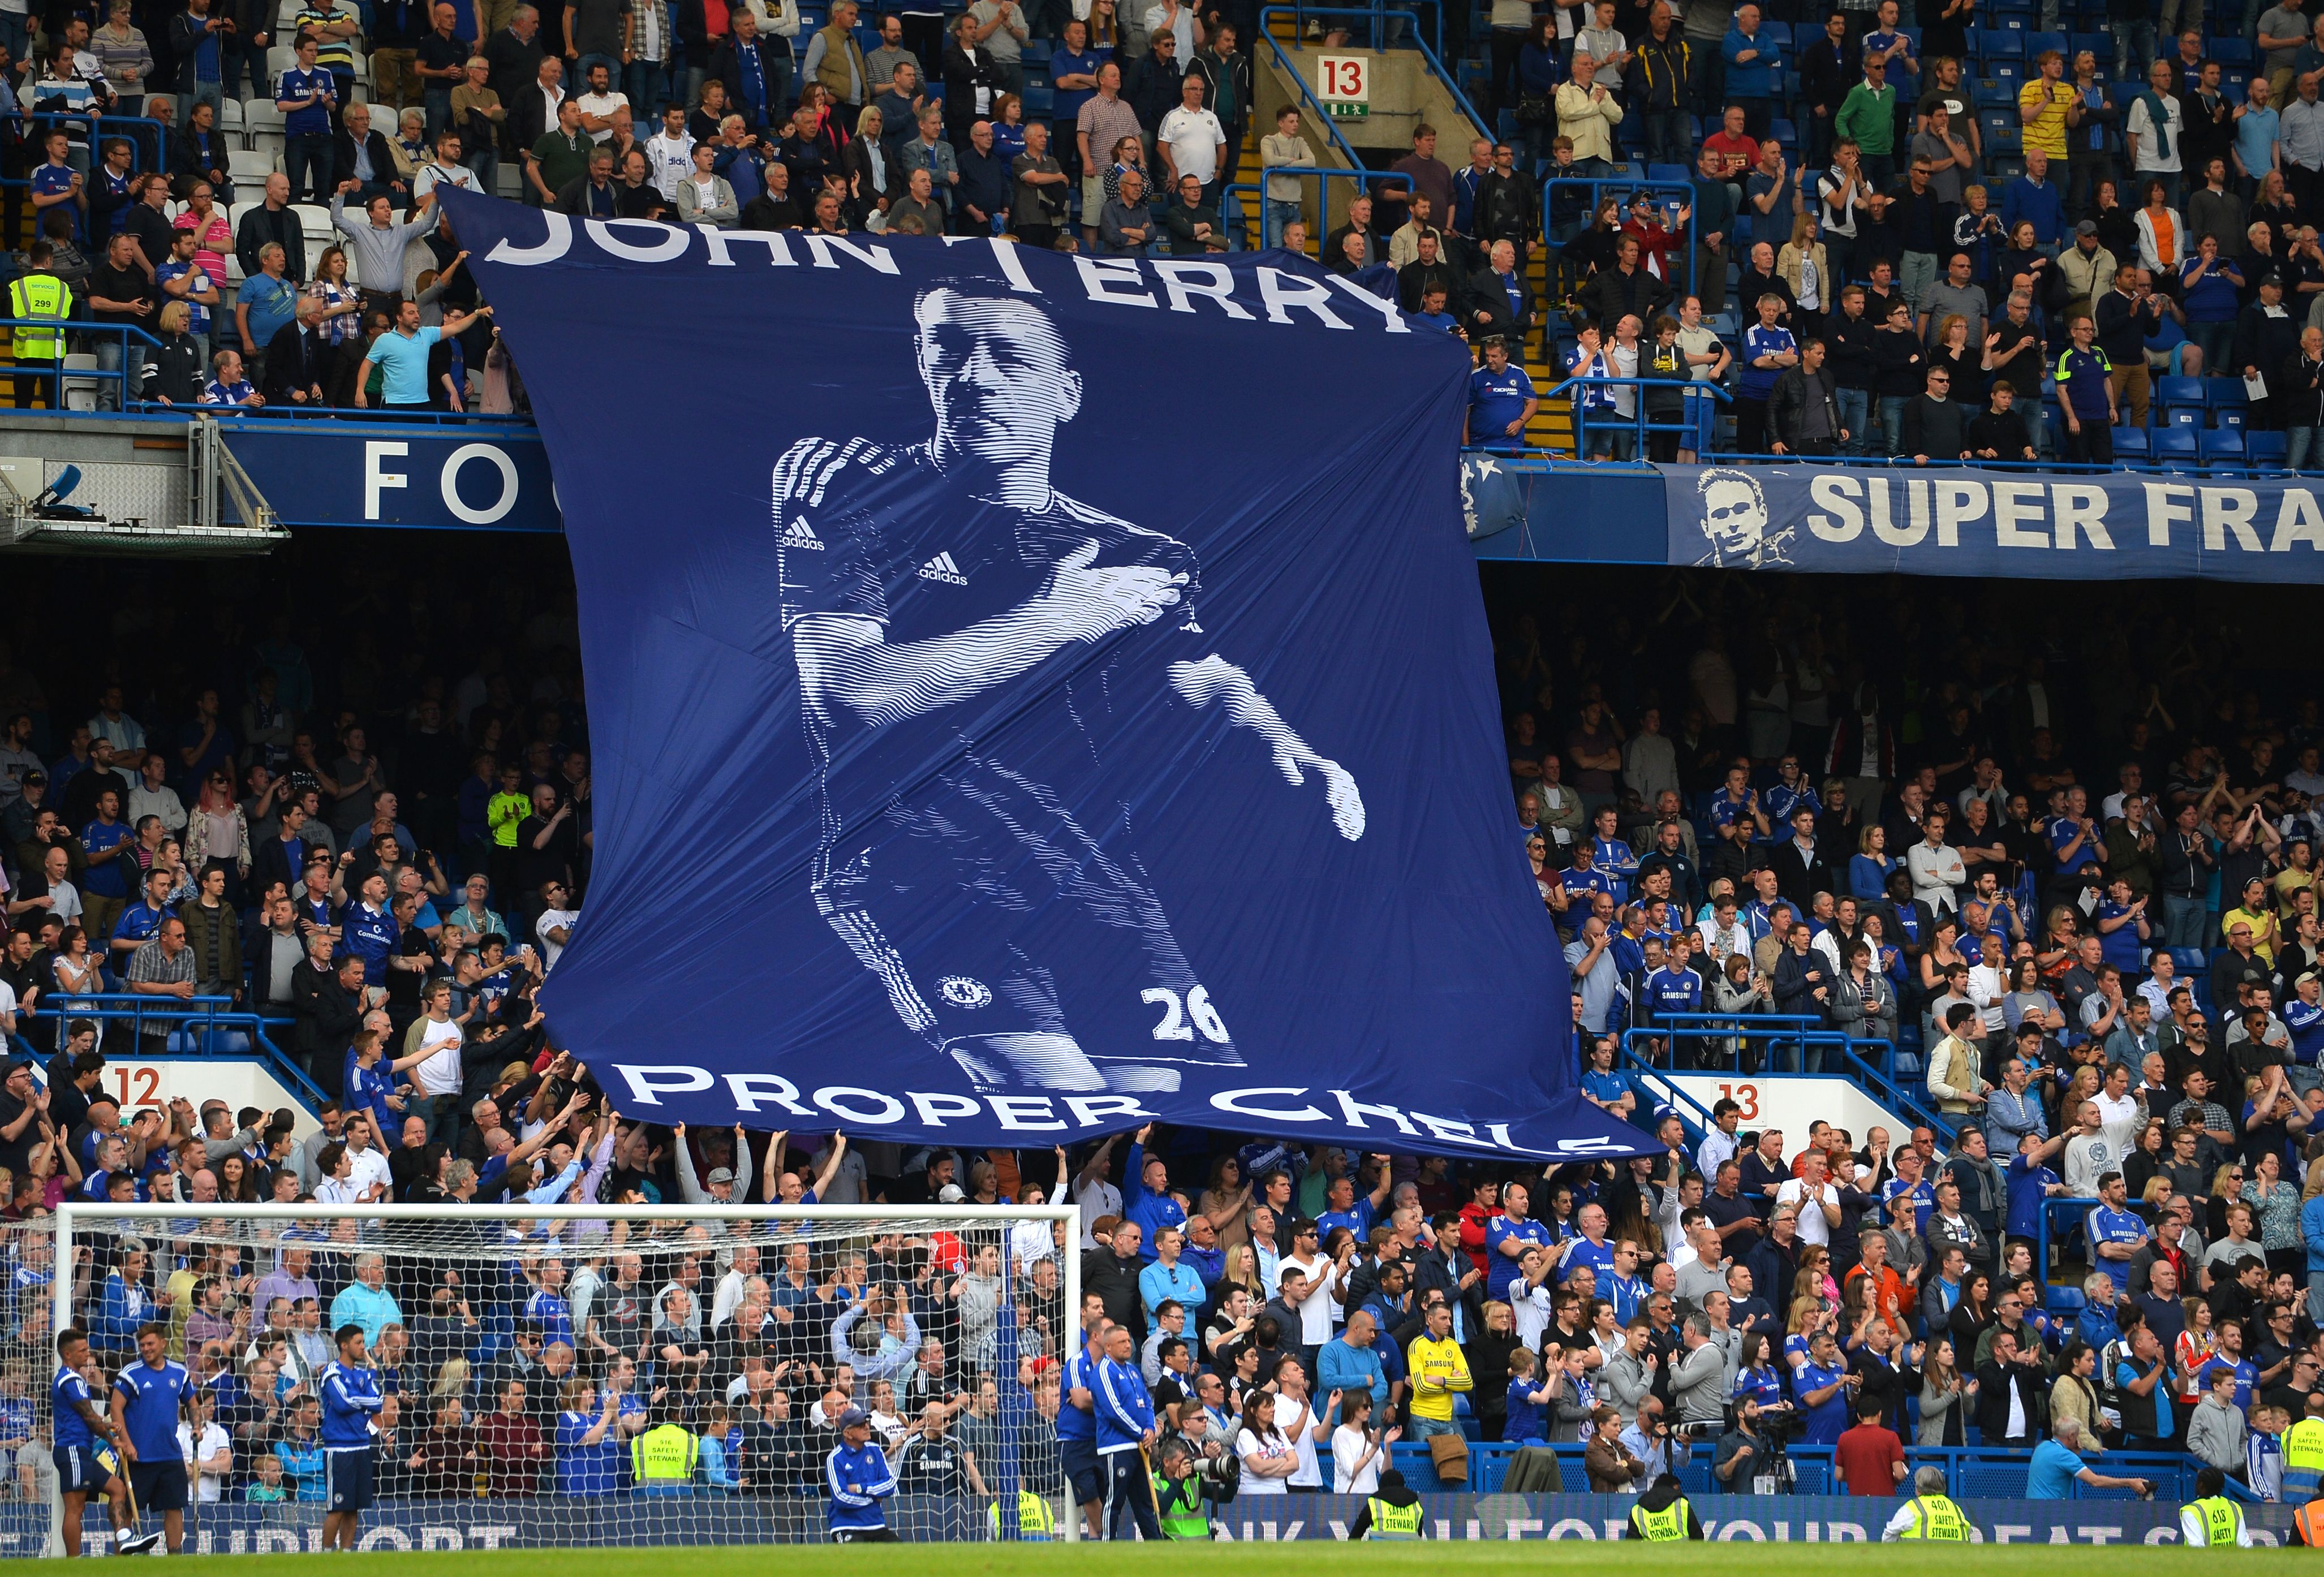 TOPSHOT - Chelsea fans unfurl a banner in support of Chelsea's English defender John Terry after the English Premier League football match between Chelsea and Leicester City at Stamford Bridge in London on May 15, 2016. / AFP / GLYN KIRK / RESTRICTED TO EDITORIAL USE. No use with unauthorized audio, video, data, fixture lists, club/league logos or 'live' services. Online in-match use limited to 75 images, no video emulation. No use in betting, games or single club/league/player publications.  /         (Photo credit should read GLYN KIRK/AFP/Getty Images)